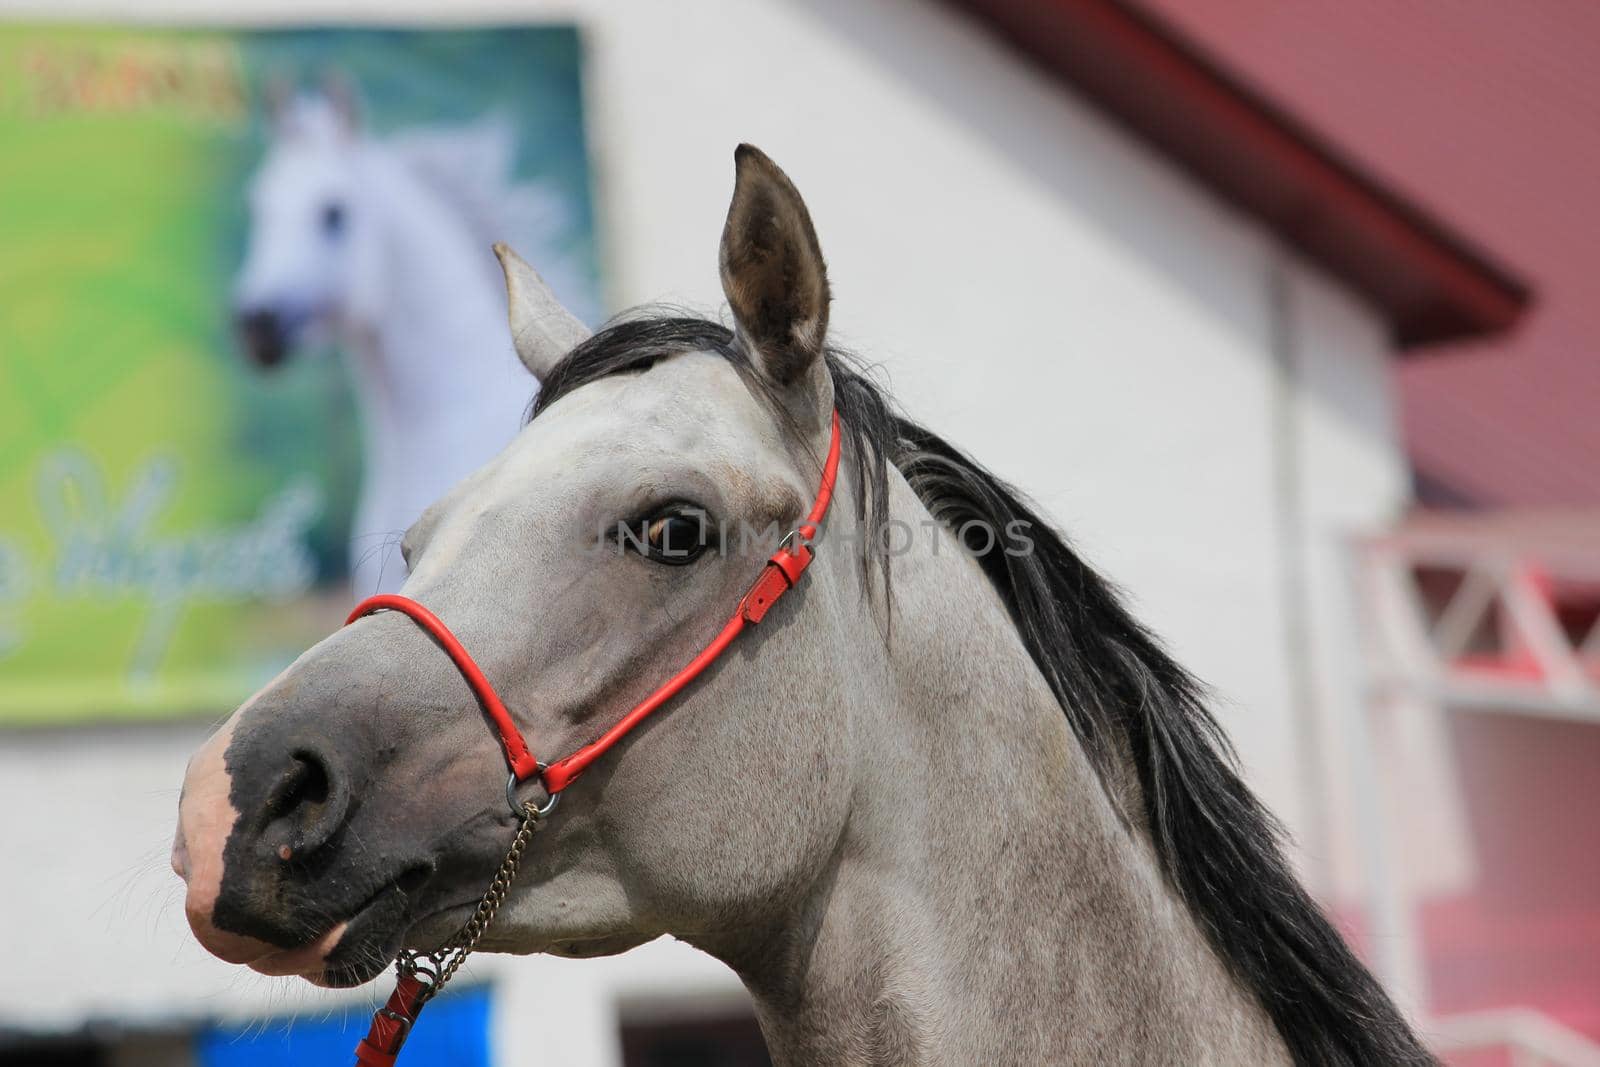 The muzzle of a white-grey horse with a mane and a close-up bridle.